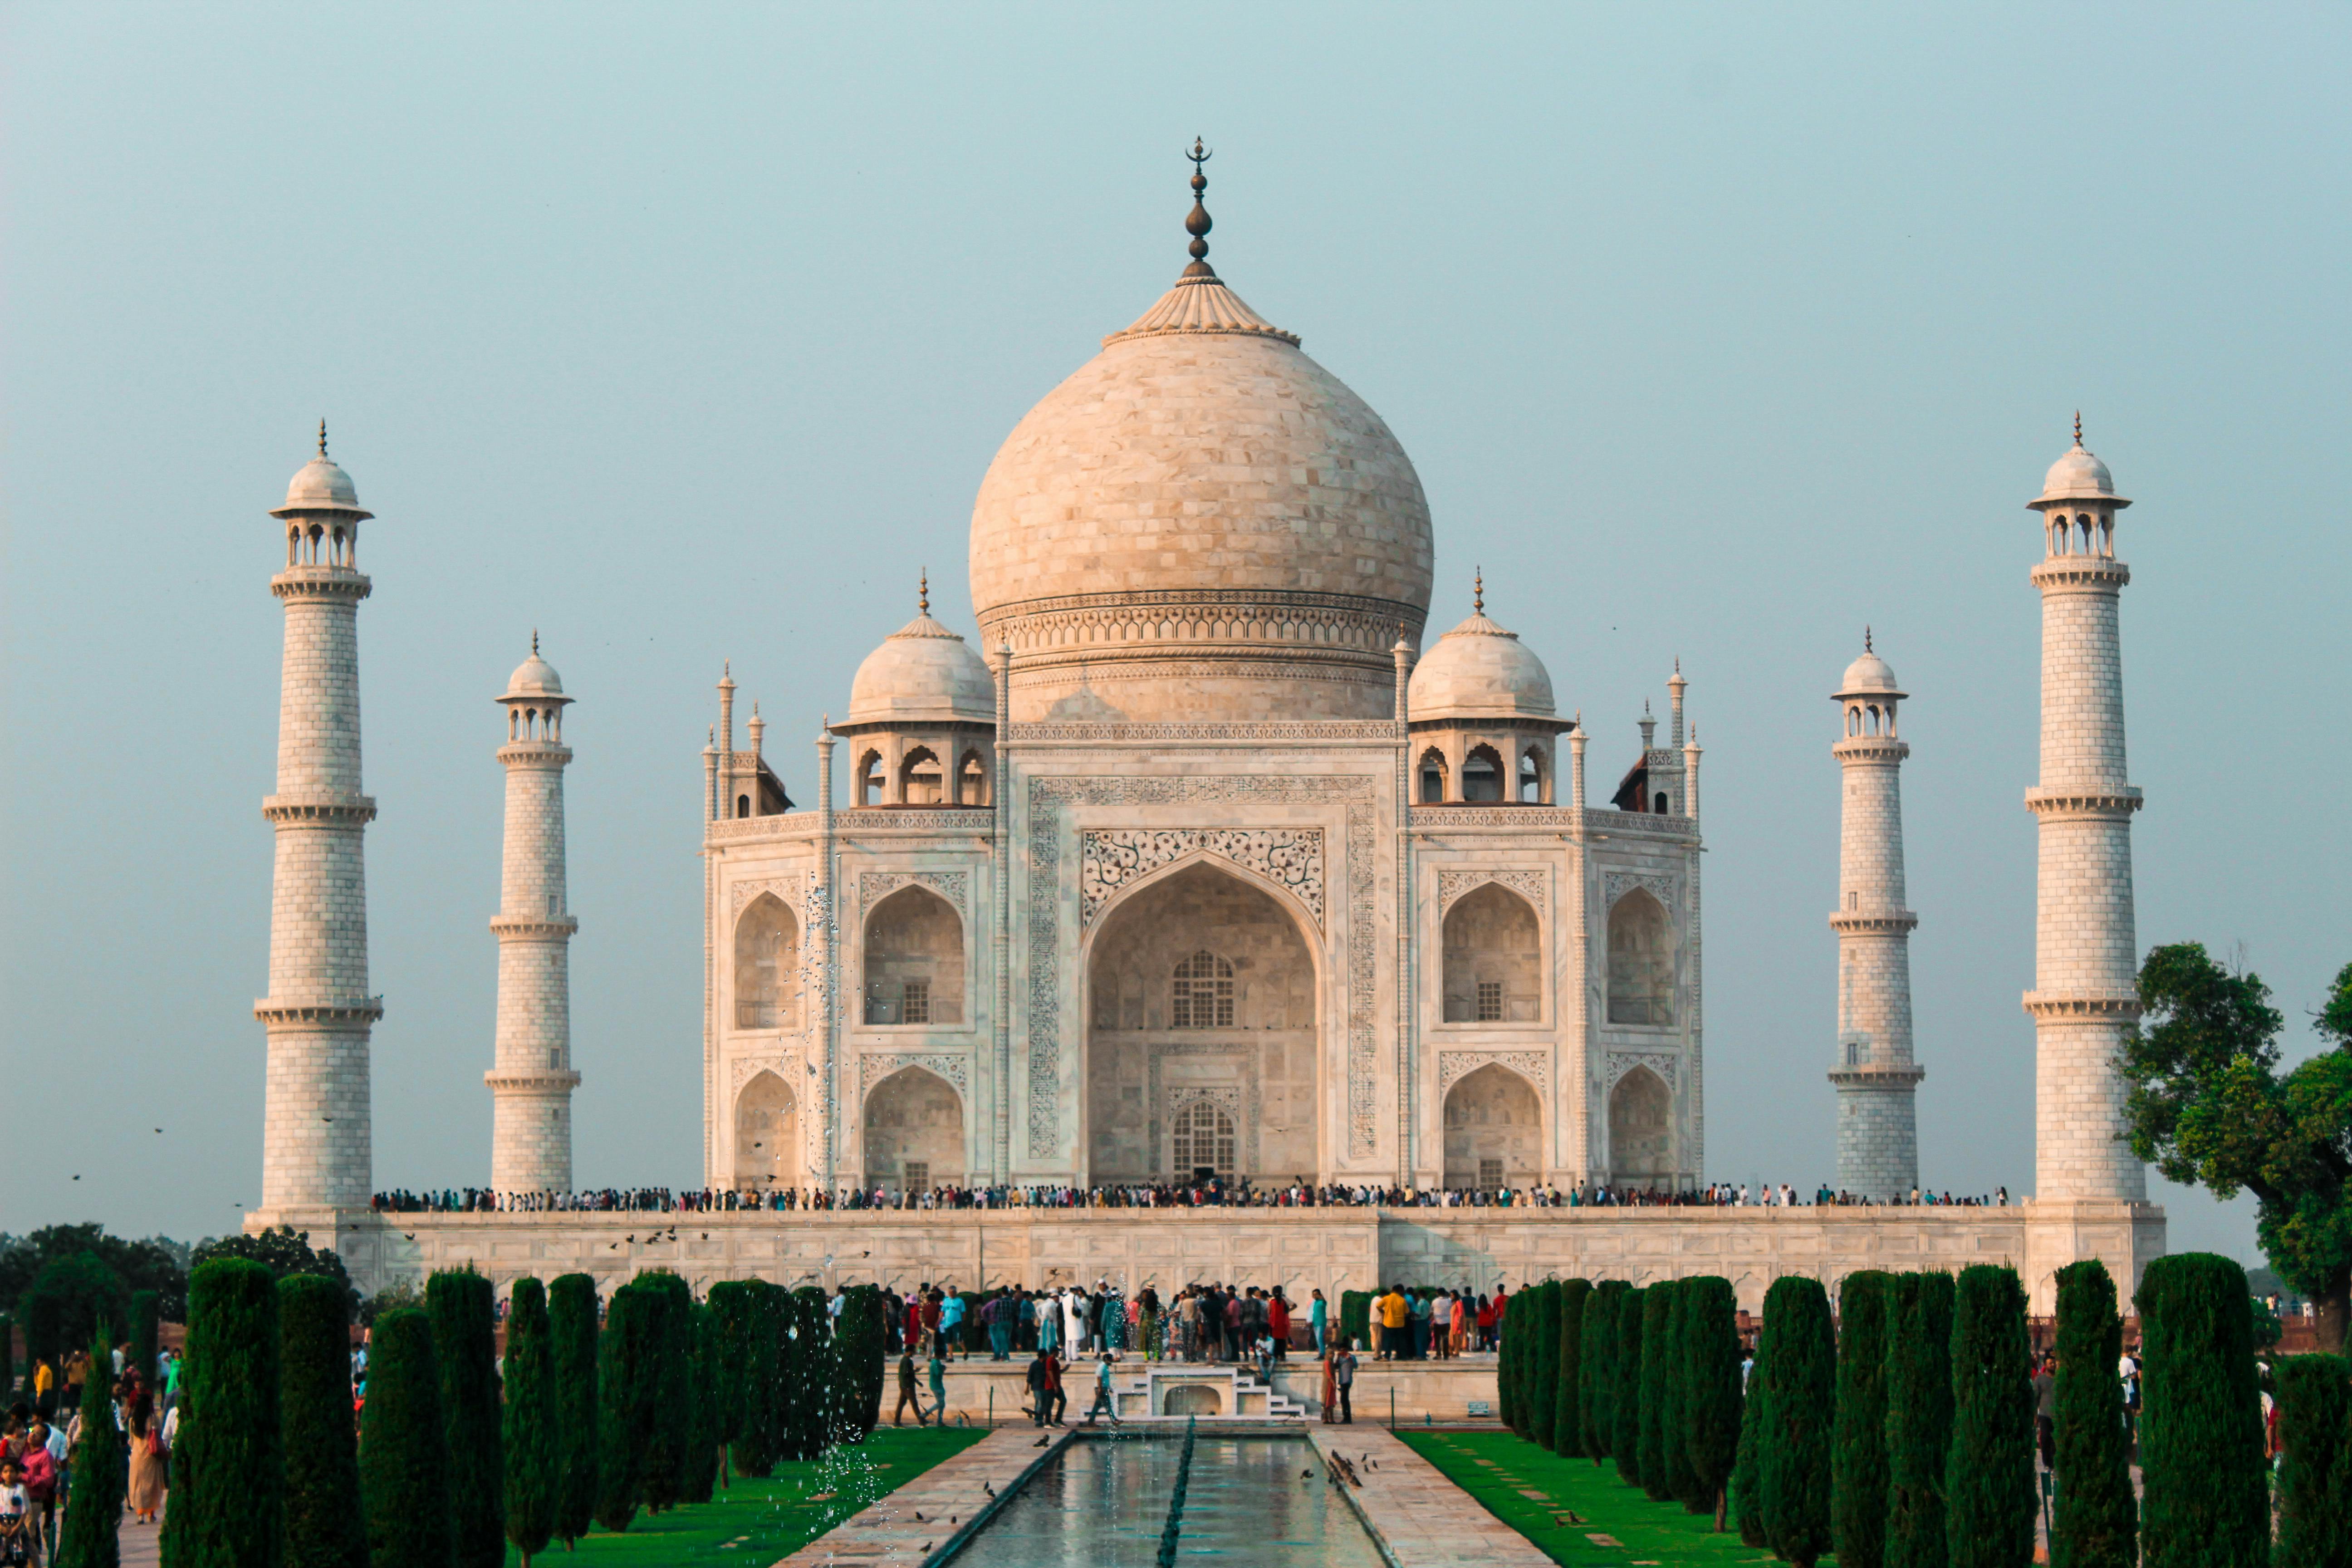 500 Taj Mahal Agra India Pictures HD  Download Free Images on Unsplash